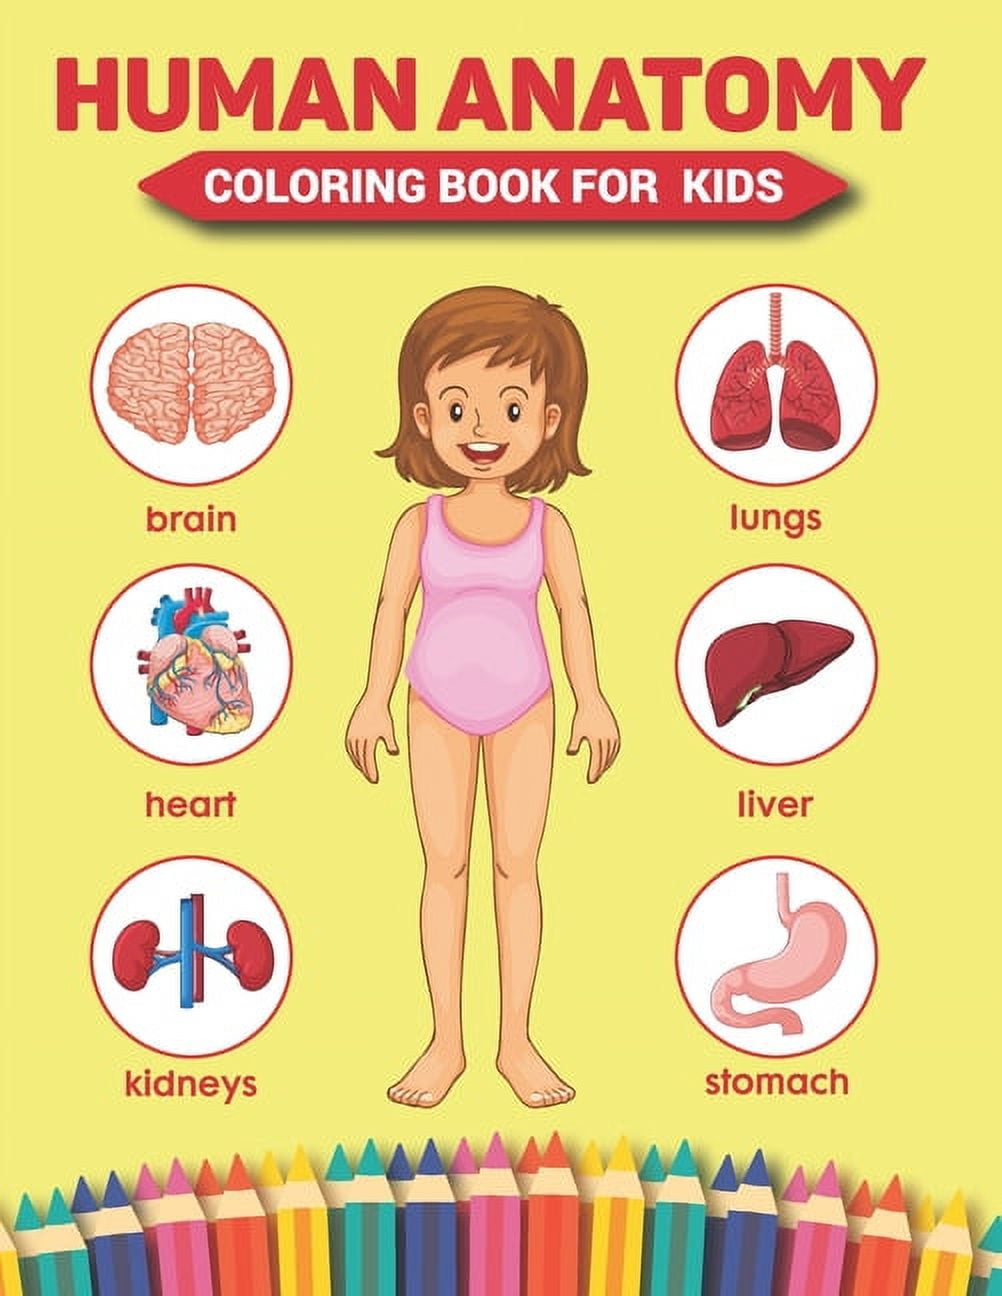 Human Anatomy Coloring Activity Book For Kids Ages 4-8: Pretty Human Body Parts Coloring Sheets For Kids Ages 2-5 and 4-8 Years Old - Children's Science Activity Books [Book]